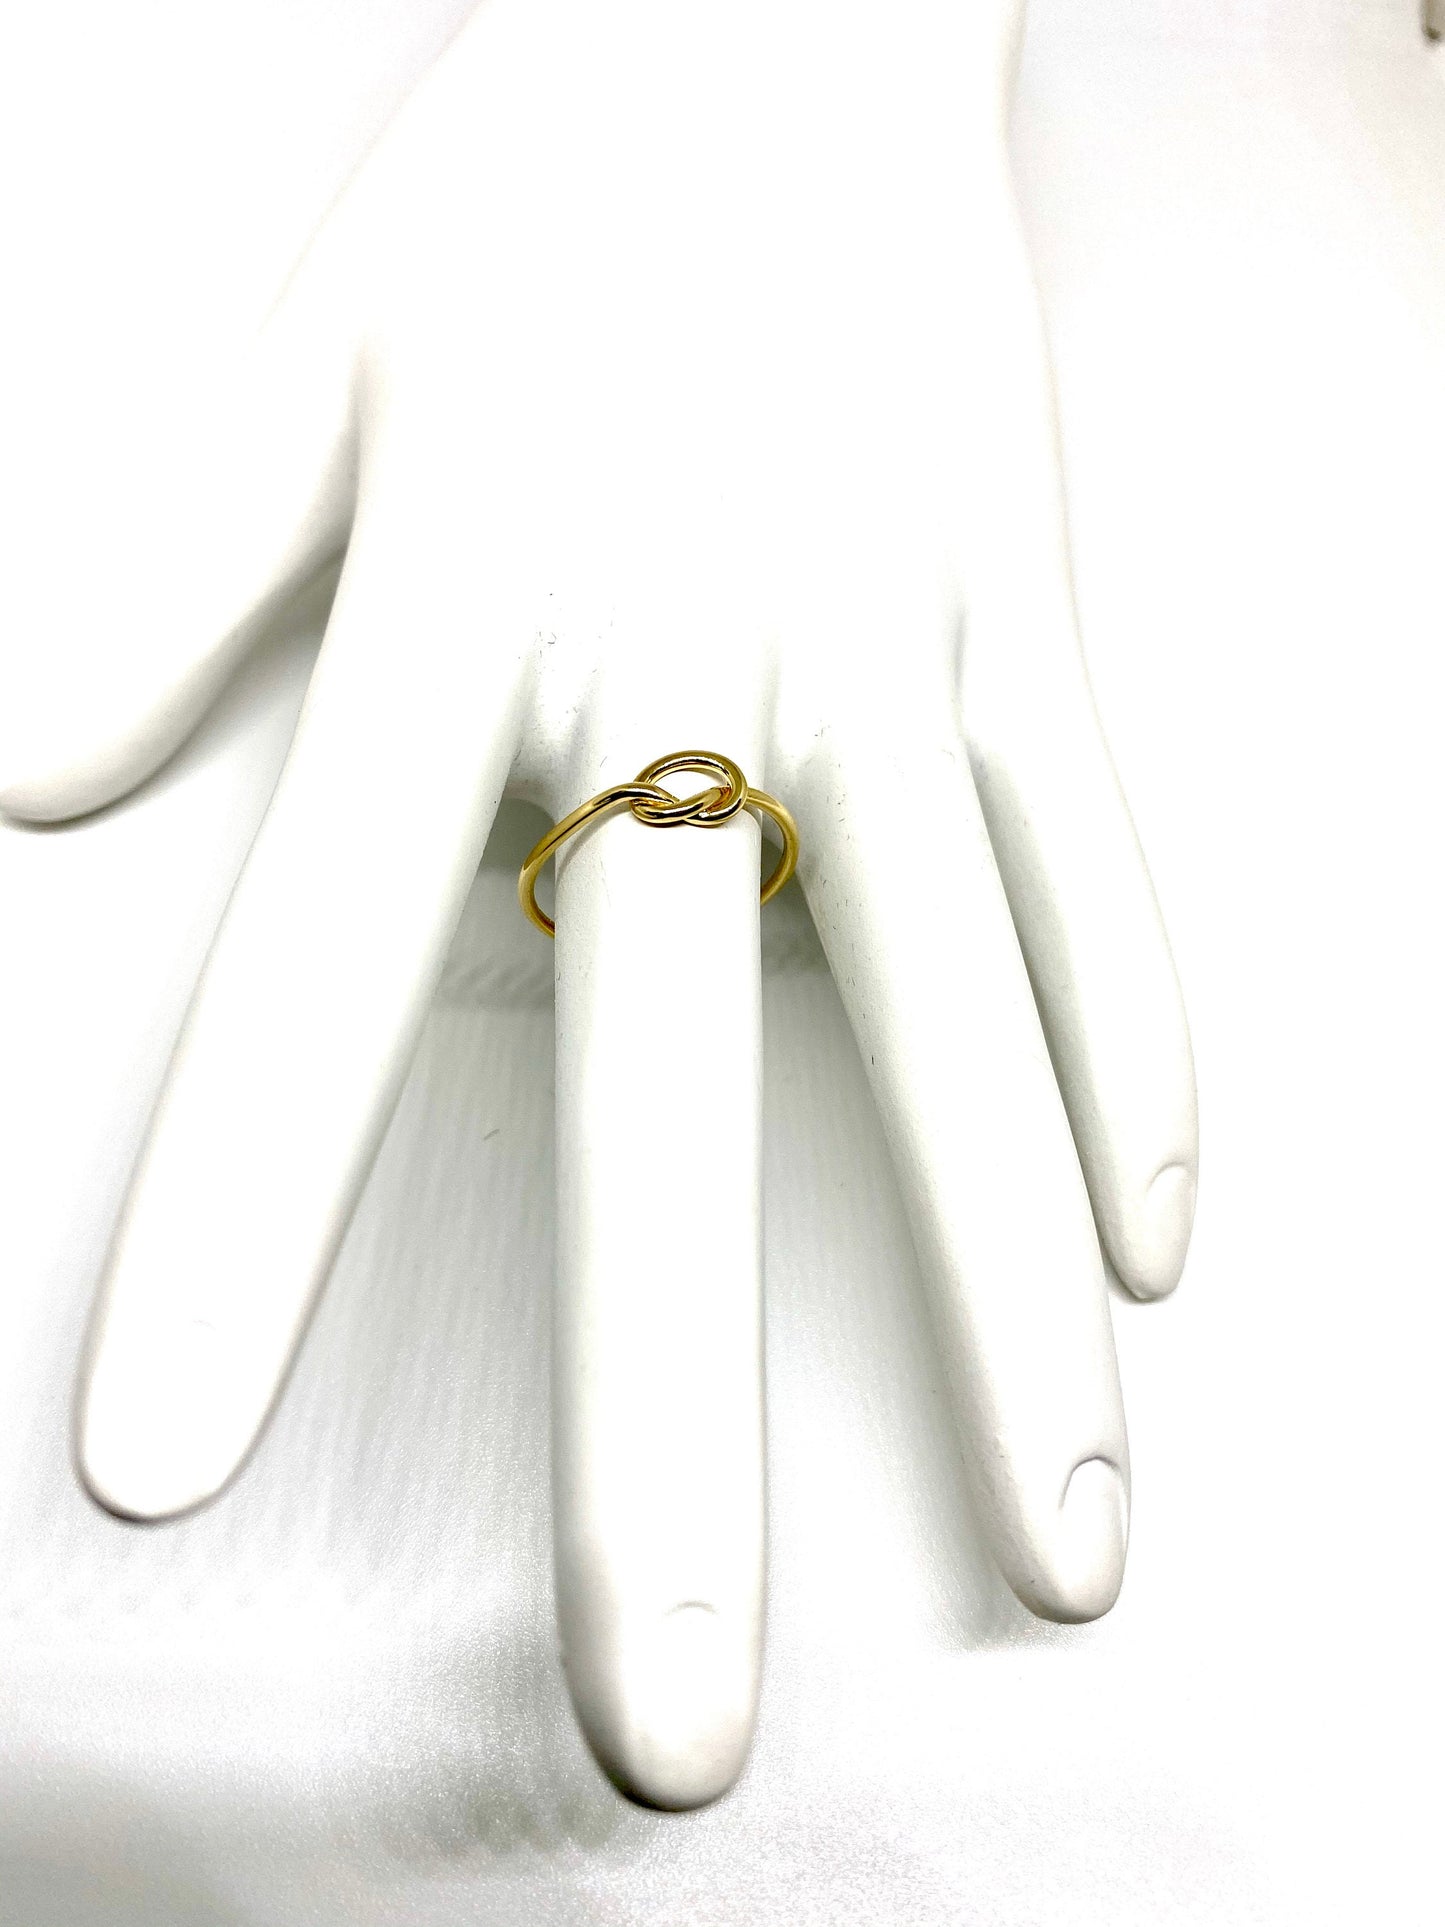 Solid Gold High Polish Love Knot Band Ring